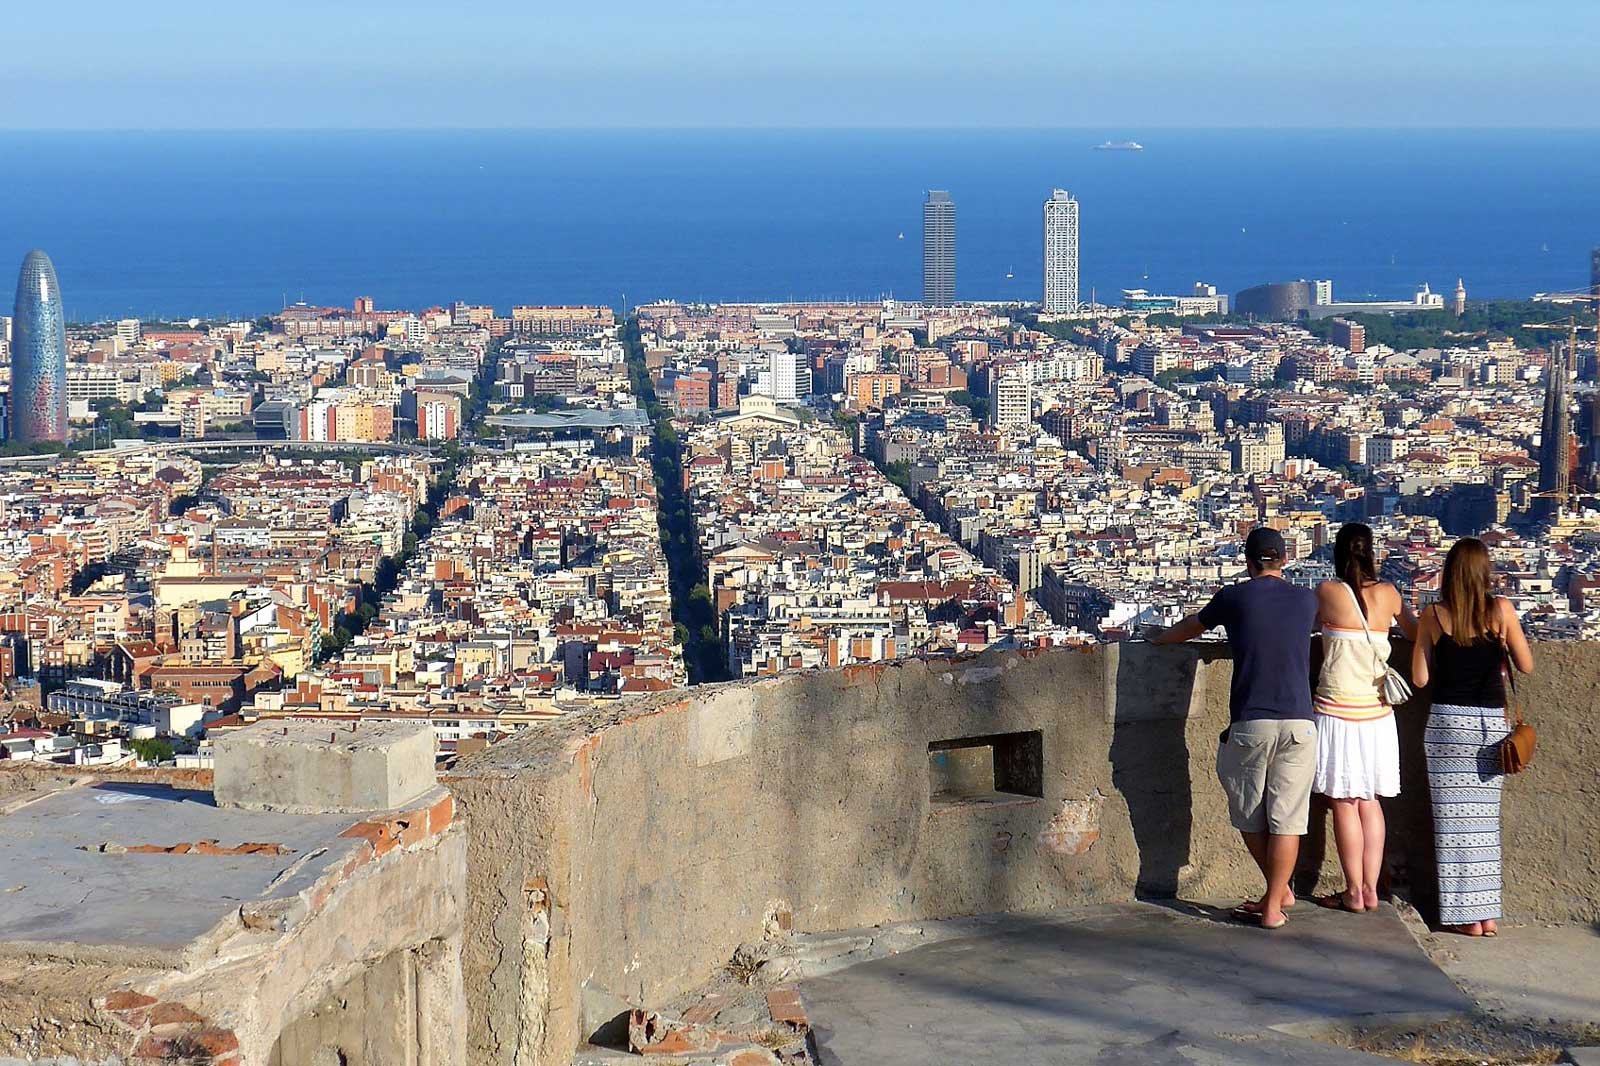 How to climb up the roof of bunker in Barcelona